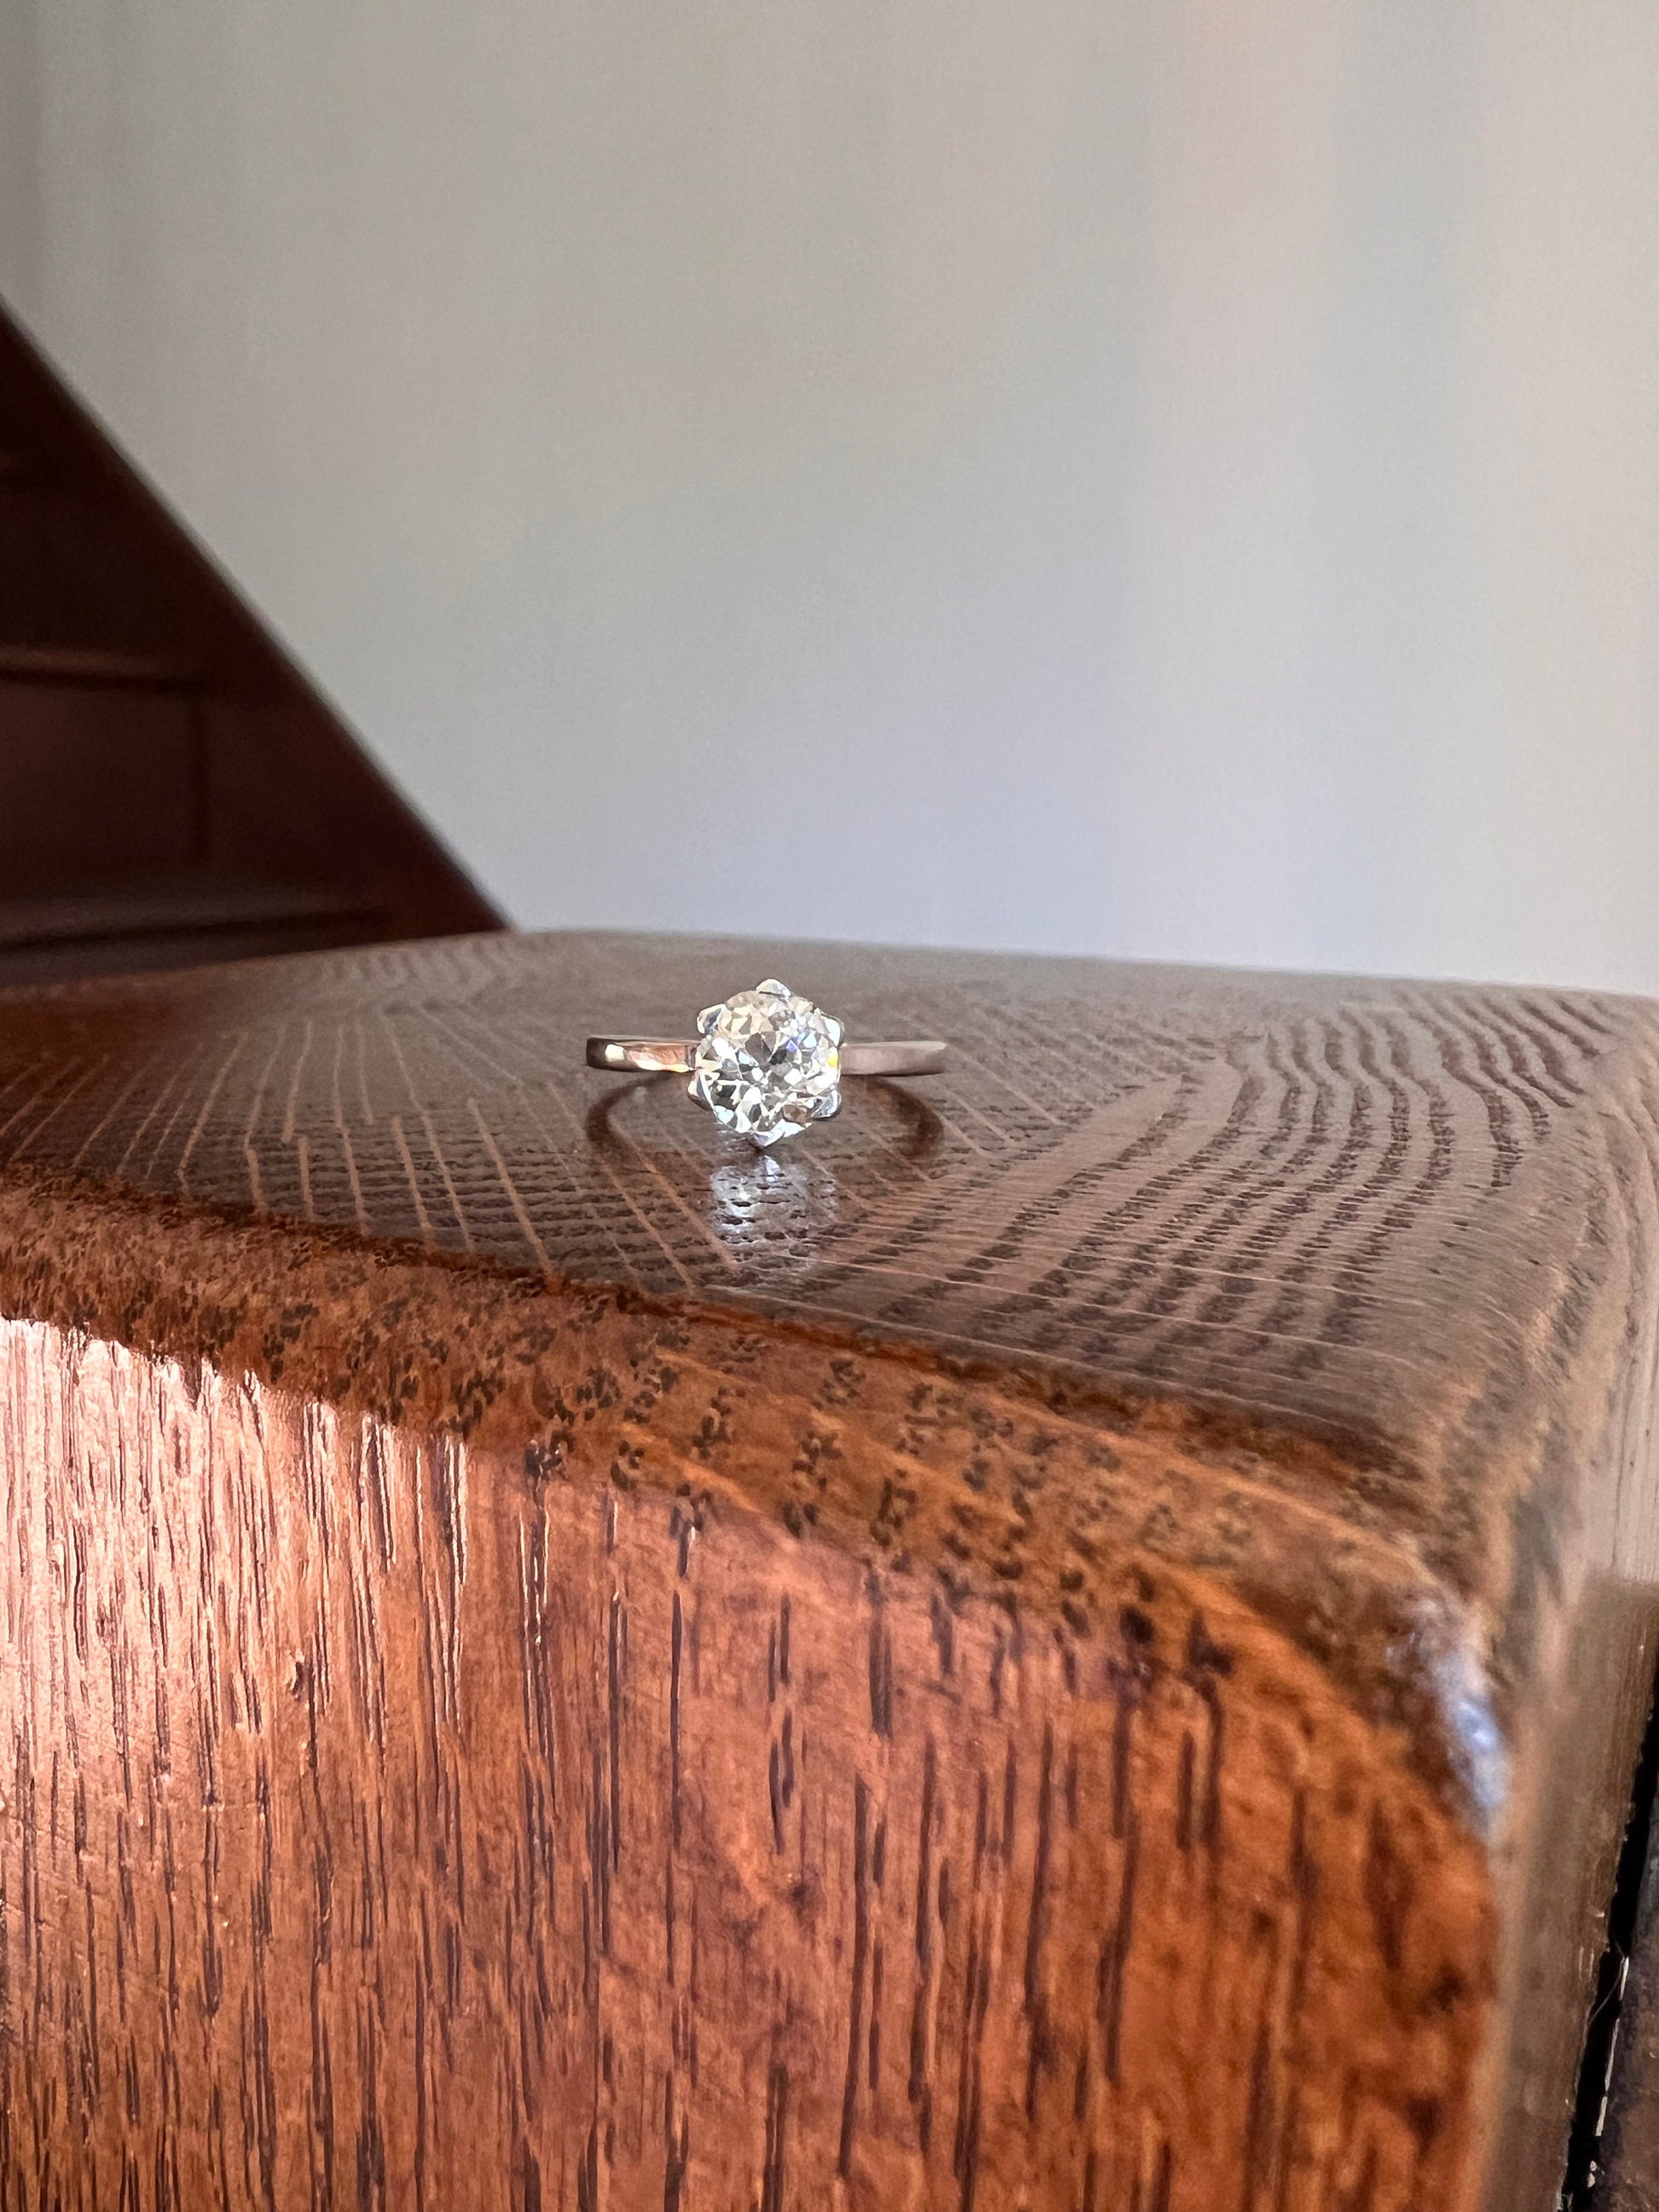 Antique 1 CARAT Old Mine Cut DIAMOND Solitaire Engagement Ring 18k White Gold PLATINUM French Art Deco Warm Very Pale Yellow Tall Stacker